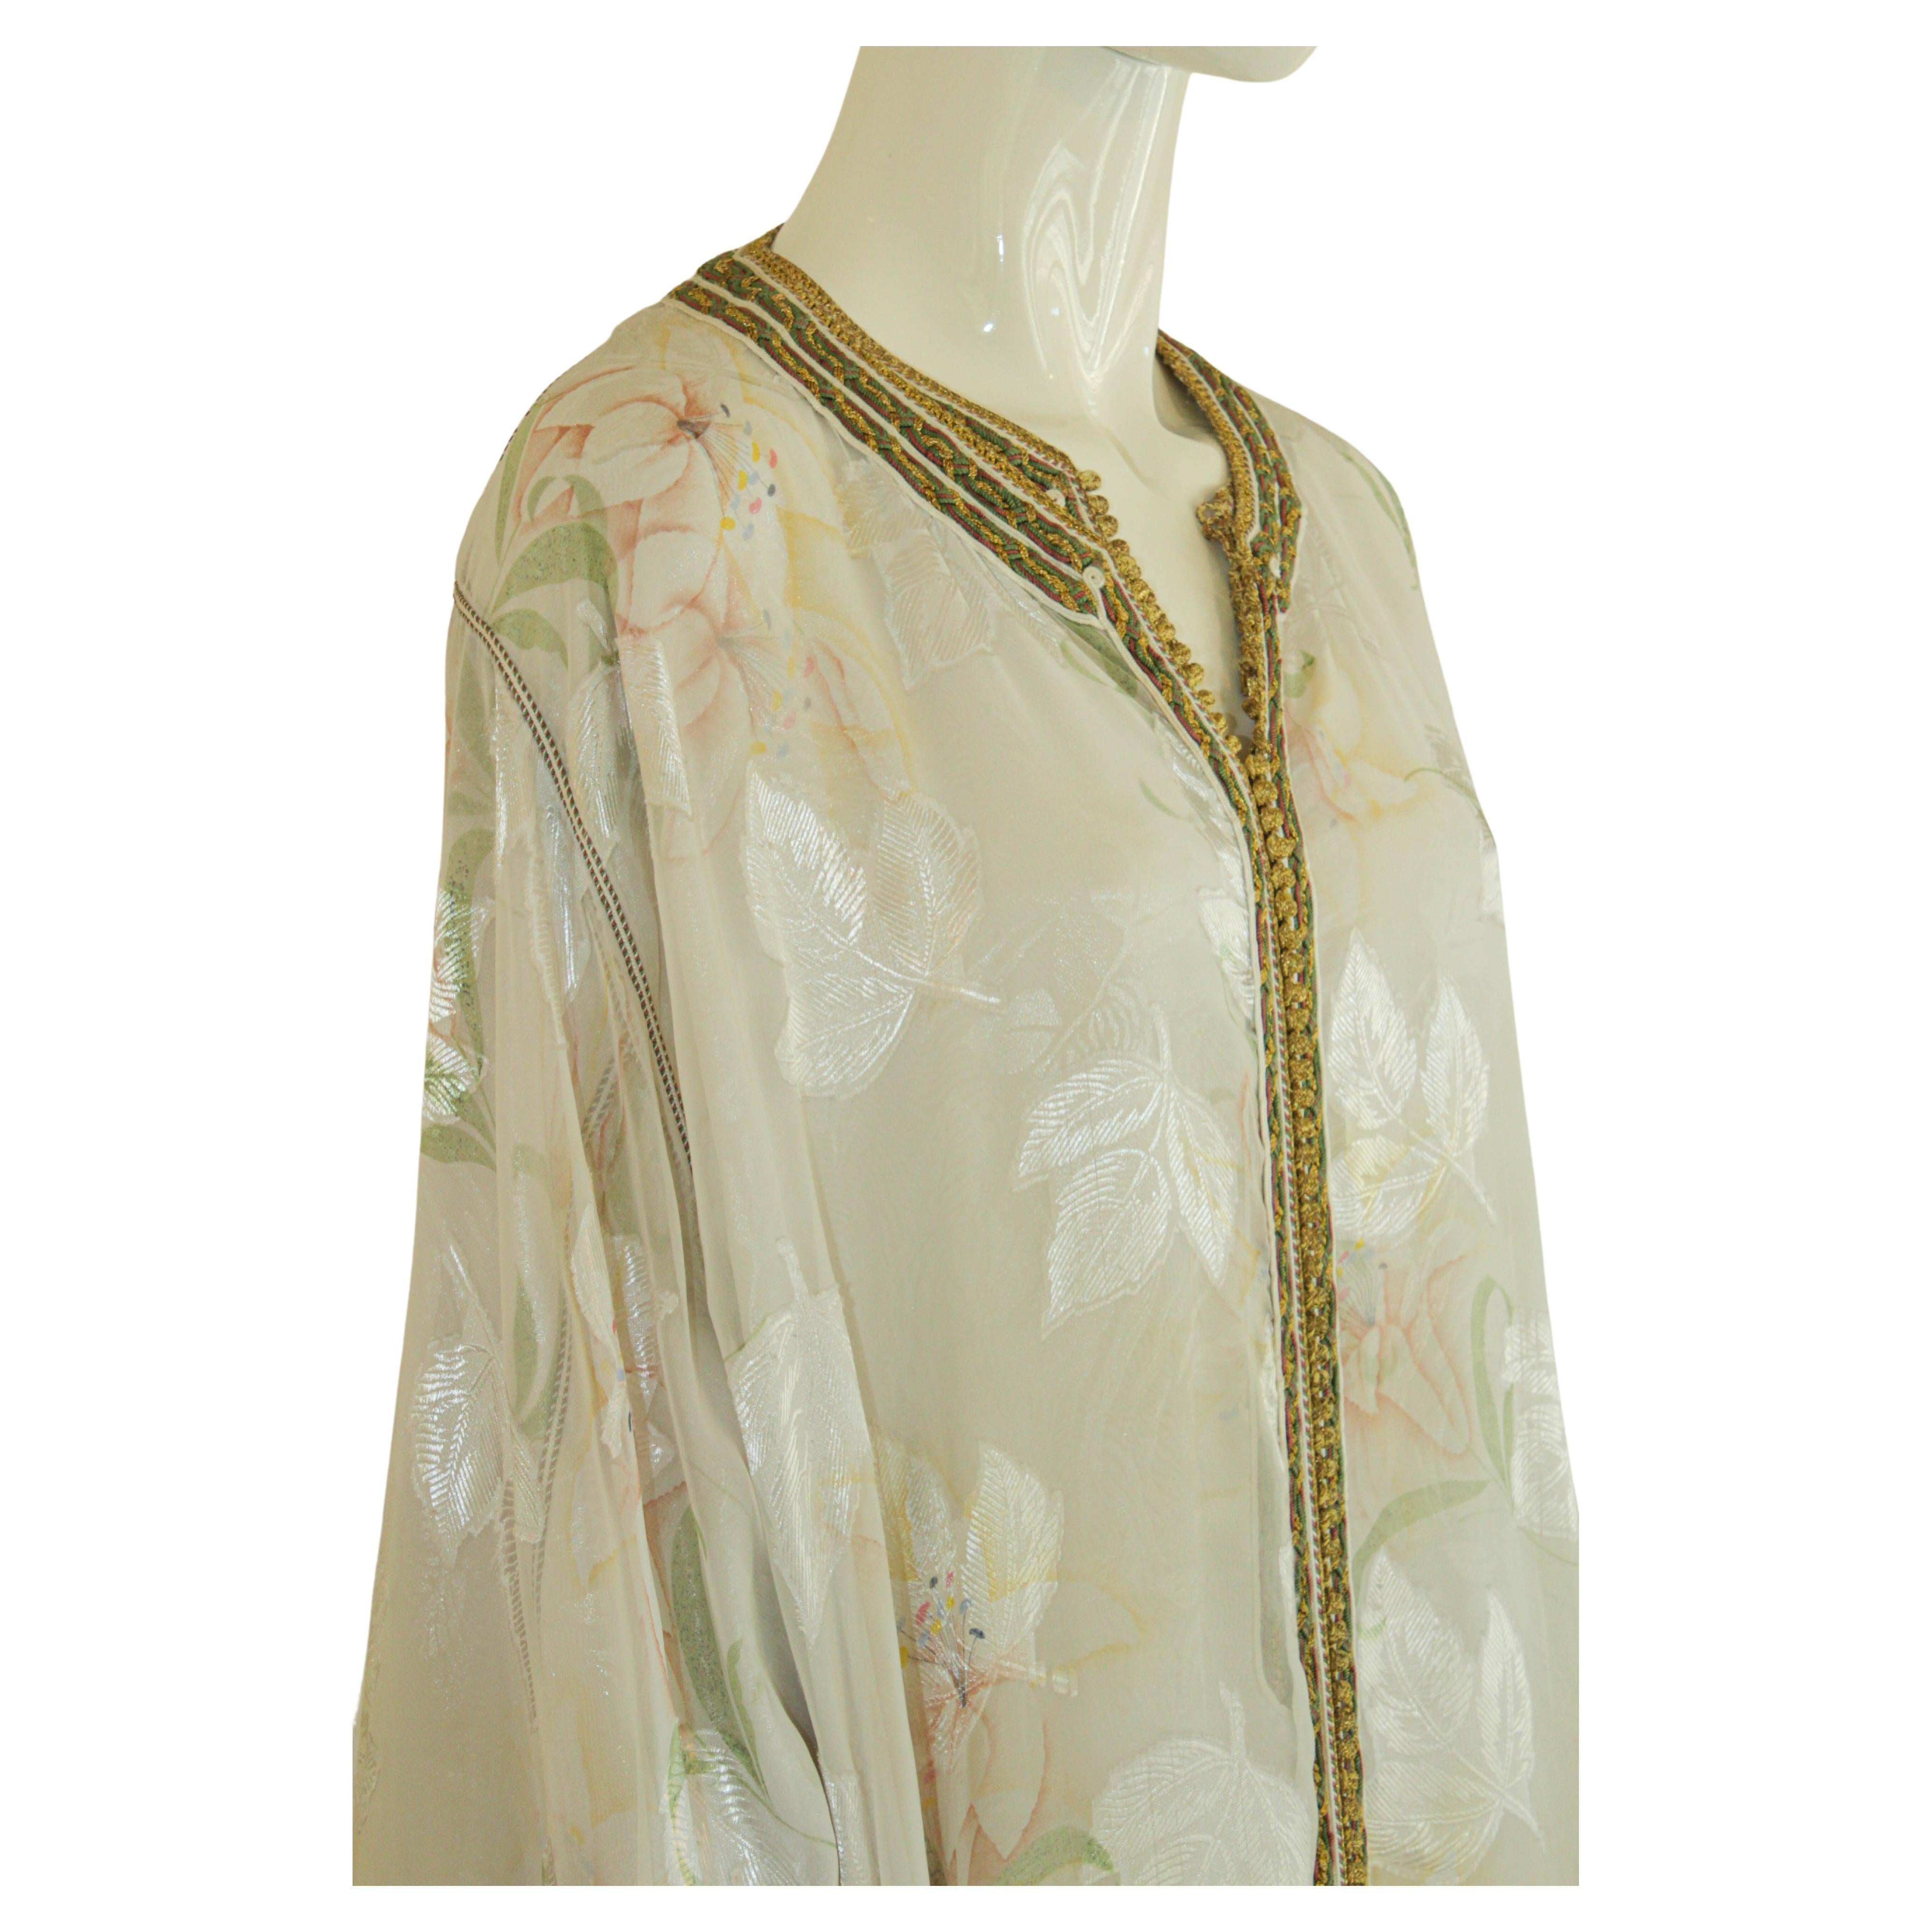 Moroccan caftan white floral silk embroidered.
This is a set of two dresses that you can wear together or separate,
circa 1980s.
This long maxi dress set kaftan is embroidered and embellished entirely by hand.
One of a kind evening Moroccan Middle